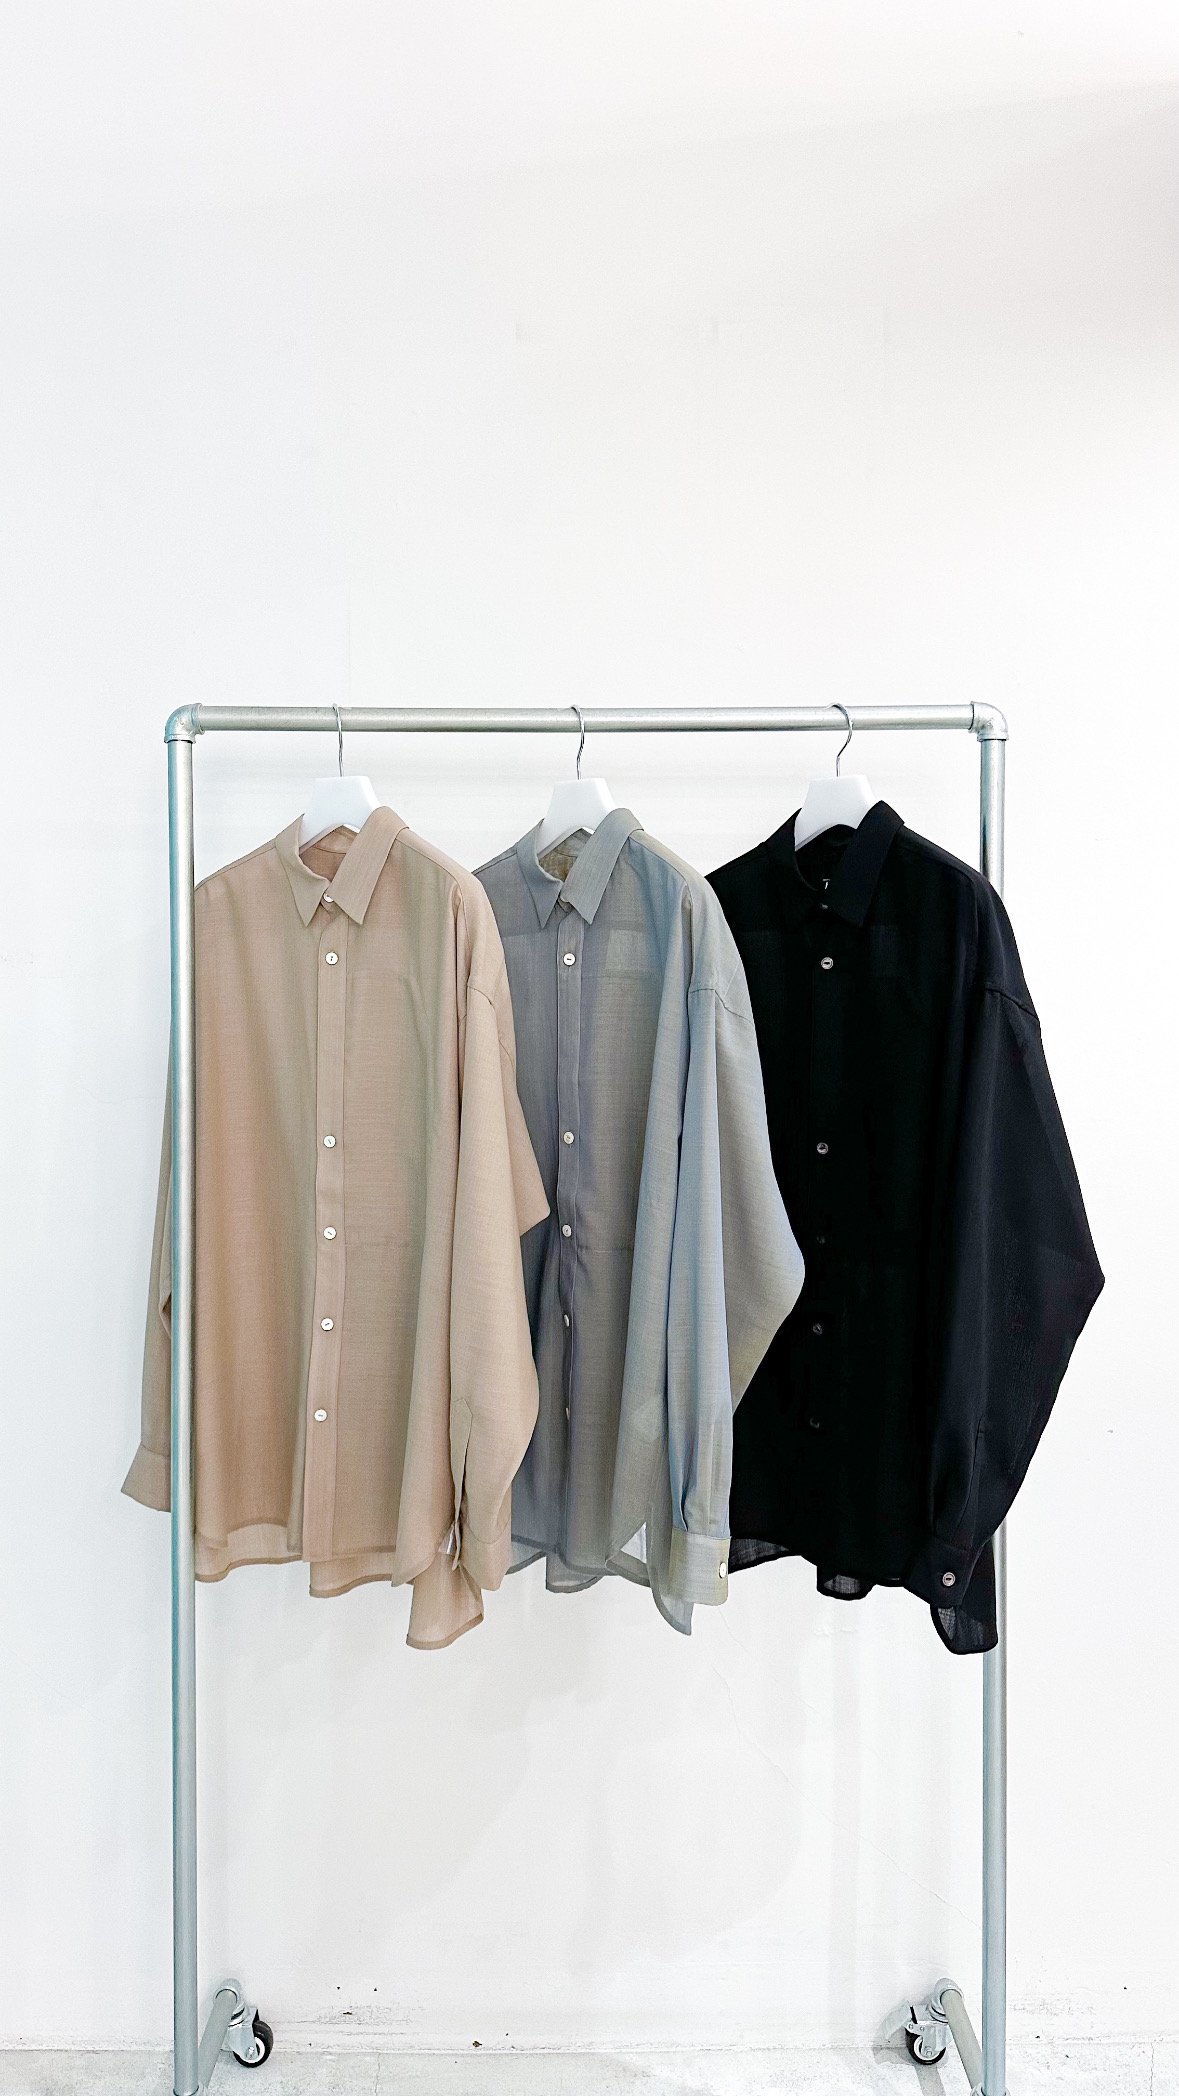 <img class='new_mark_img1' src='https://img.shop-pro.jp/img/new/icons47.gif' style='border:none;display:inline;margin:0px;padding:0px;width:auto;' />fly front pocket shirt